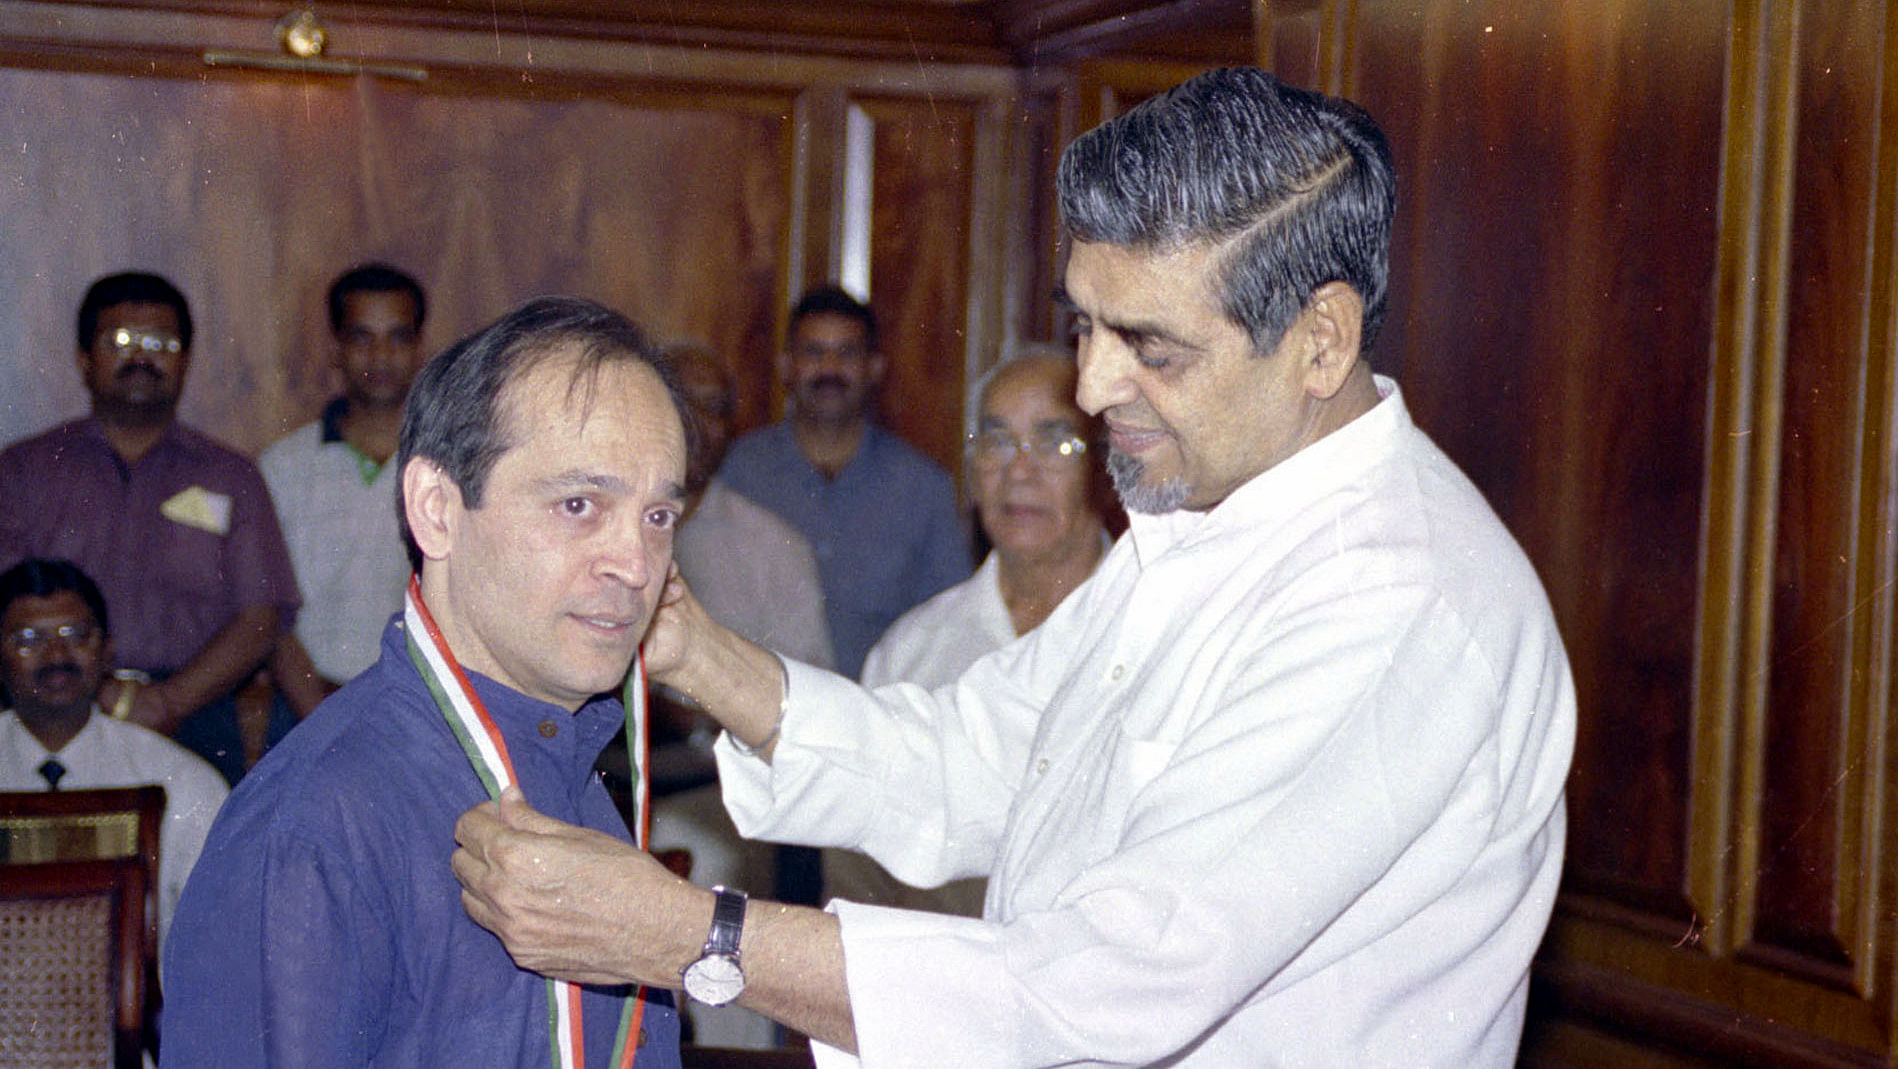 A 2005 photo of Vikram Seth receiving ‘Pravasi Bhartiya Samman’ award from then Minister of State (Independent Charge) for Overseas Indian Affairs, Jagdish Tytler. (Photo: <a href="http://photodivision.gov.in/new/IntroPhotodetails.asp?thisPage=246">PIB</a>)